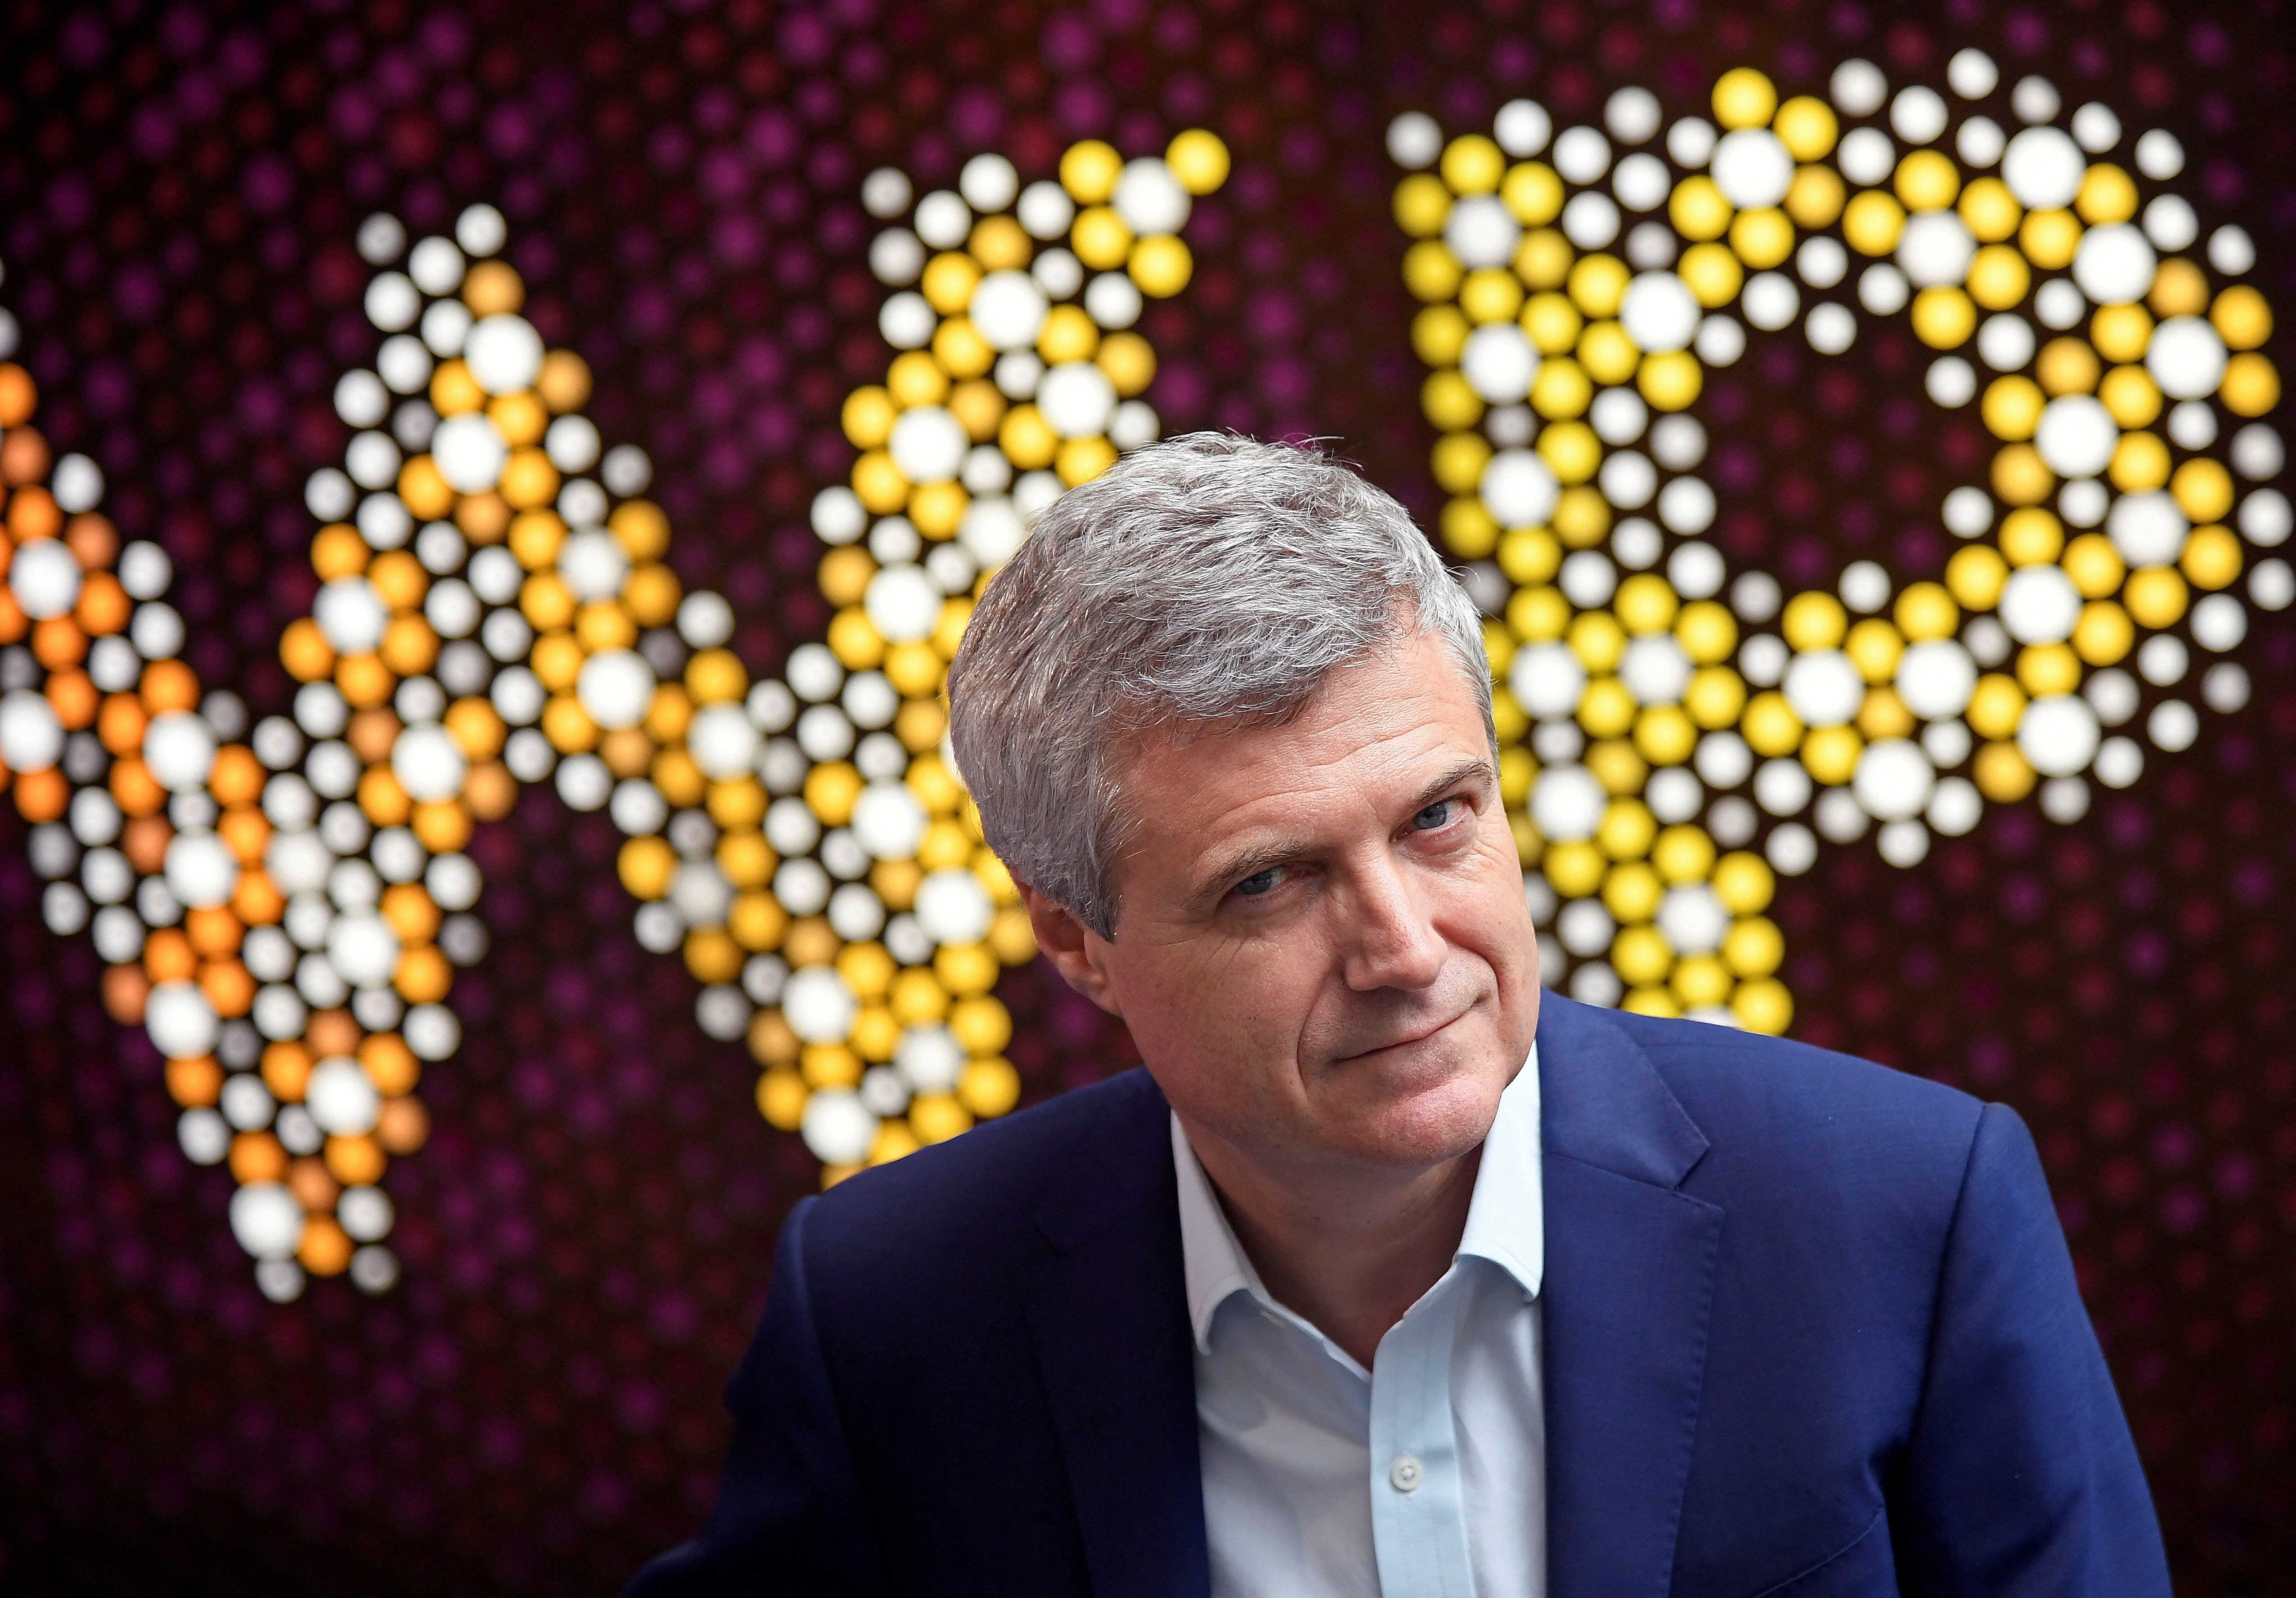 Mark Read, CEO of WPP Group, the largest global advertising and public relations agency, poses for a portrait at their offices in London